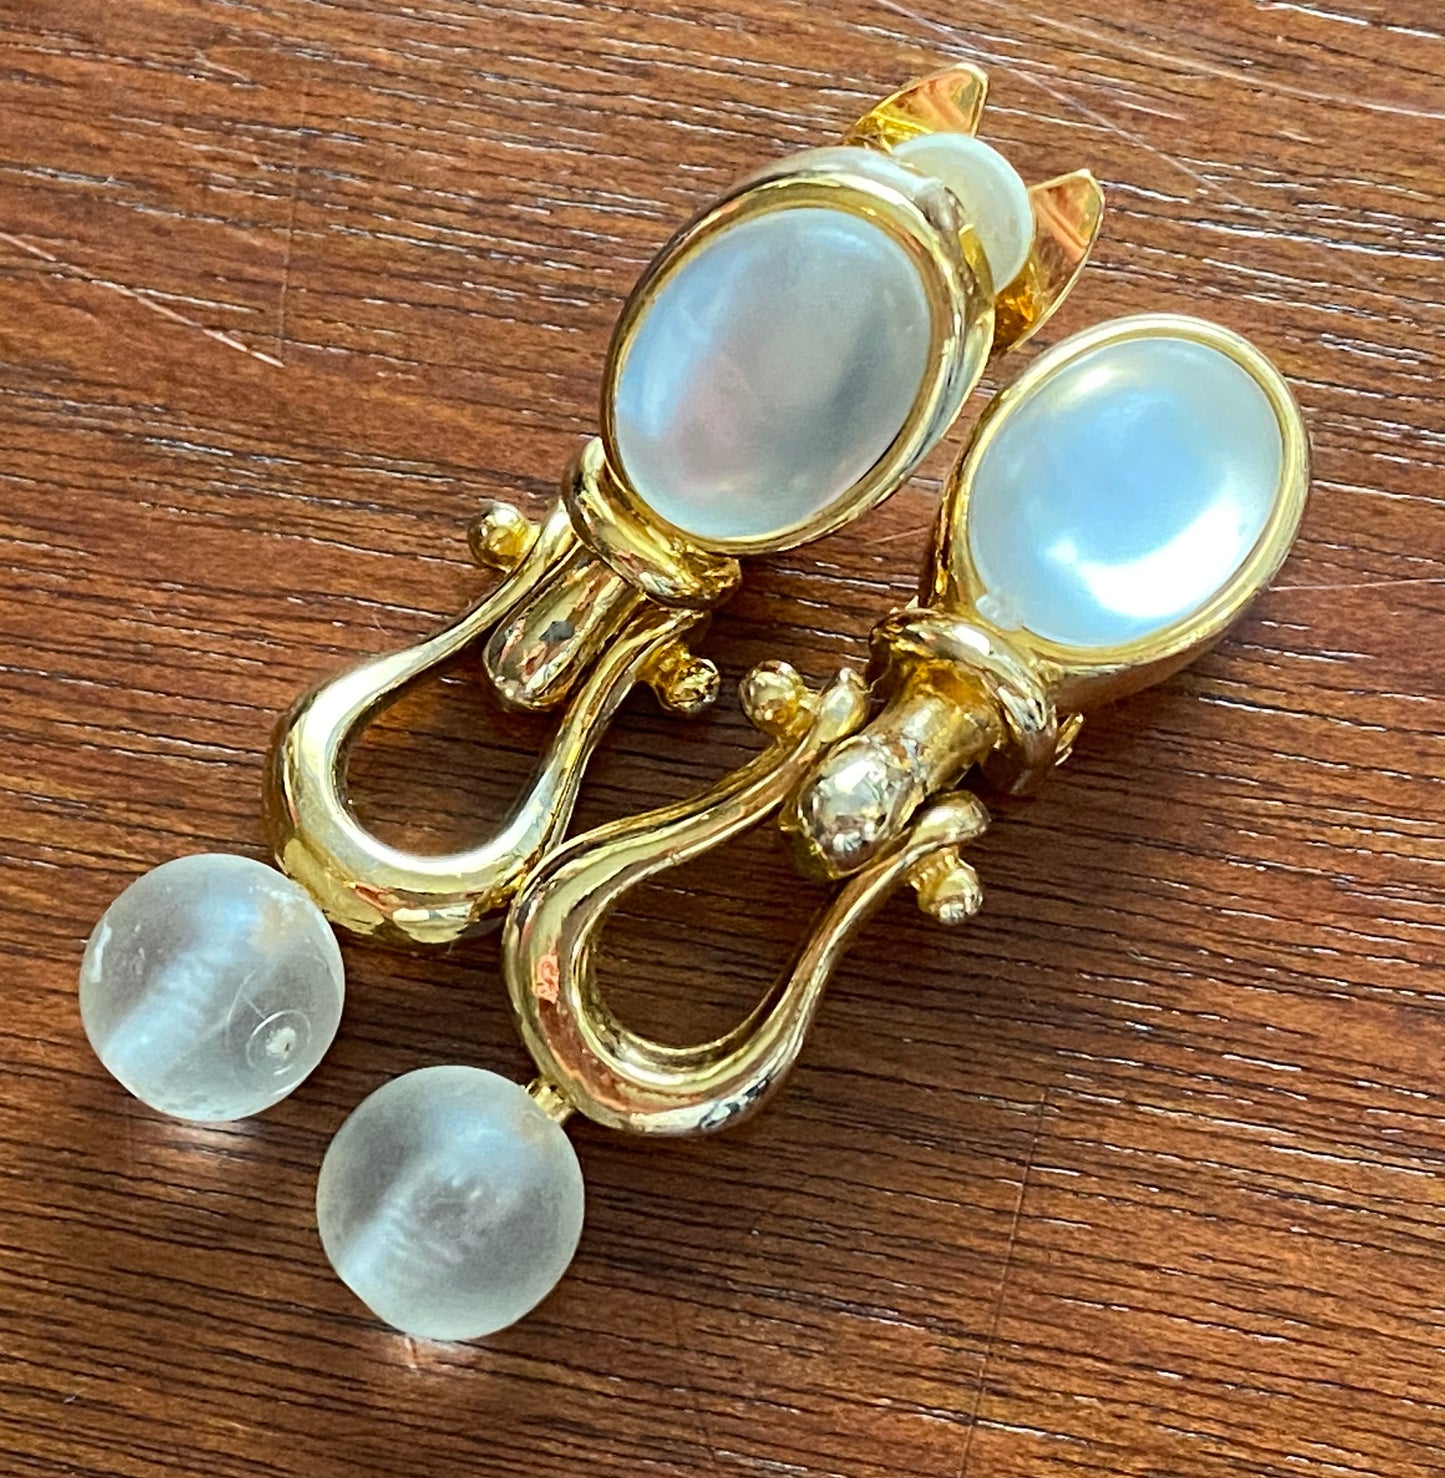 Vintage 80's PAOLO GUCCI Moonstone Gold Tone Door Knocker Clip on Earrings